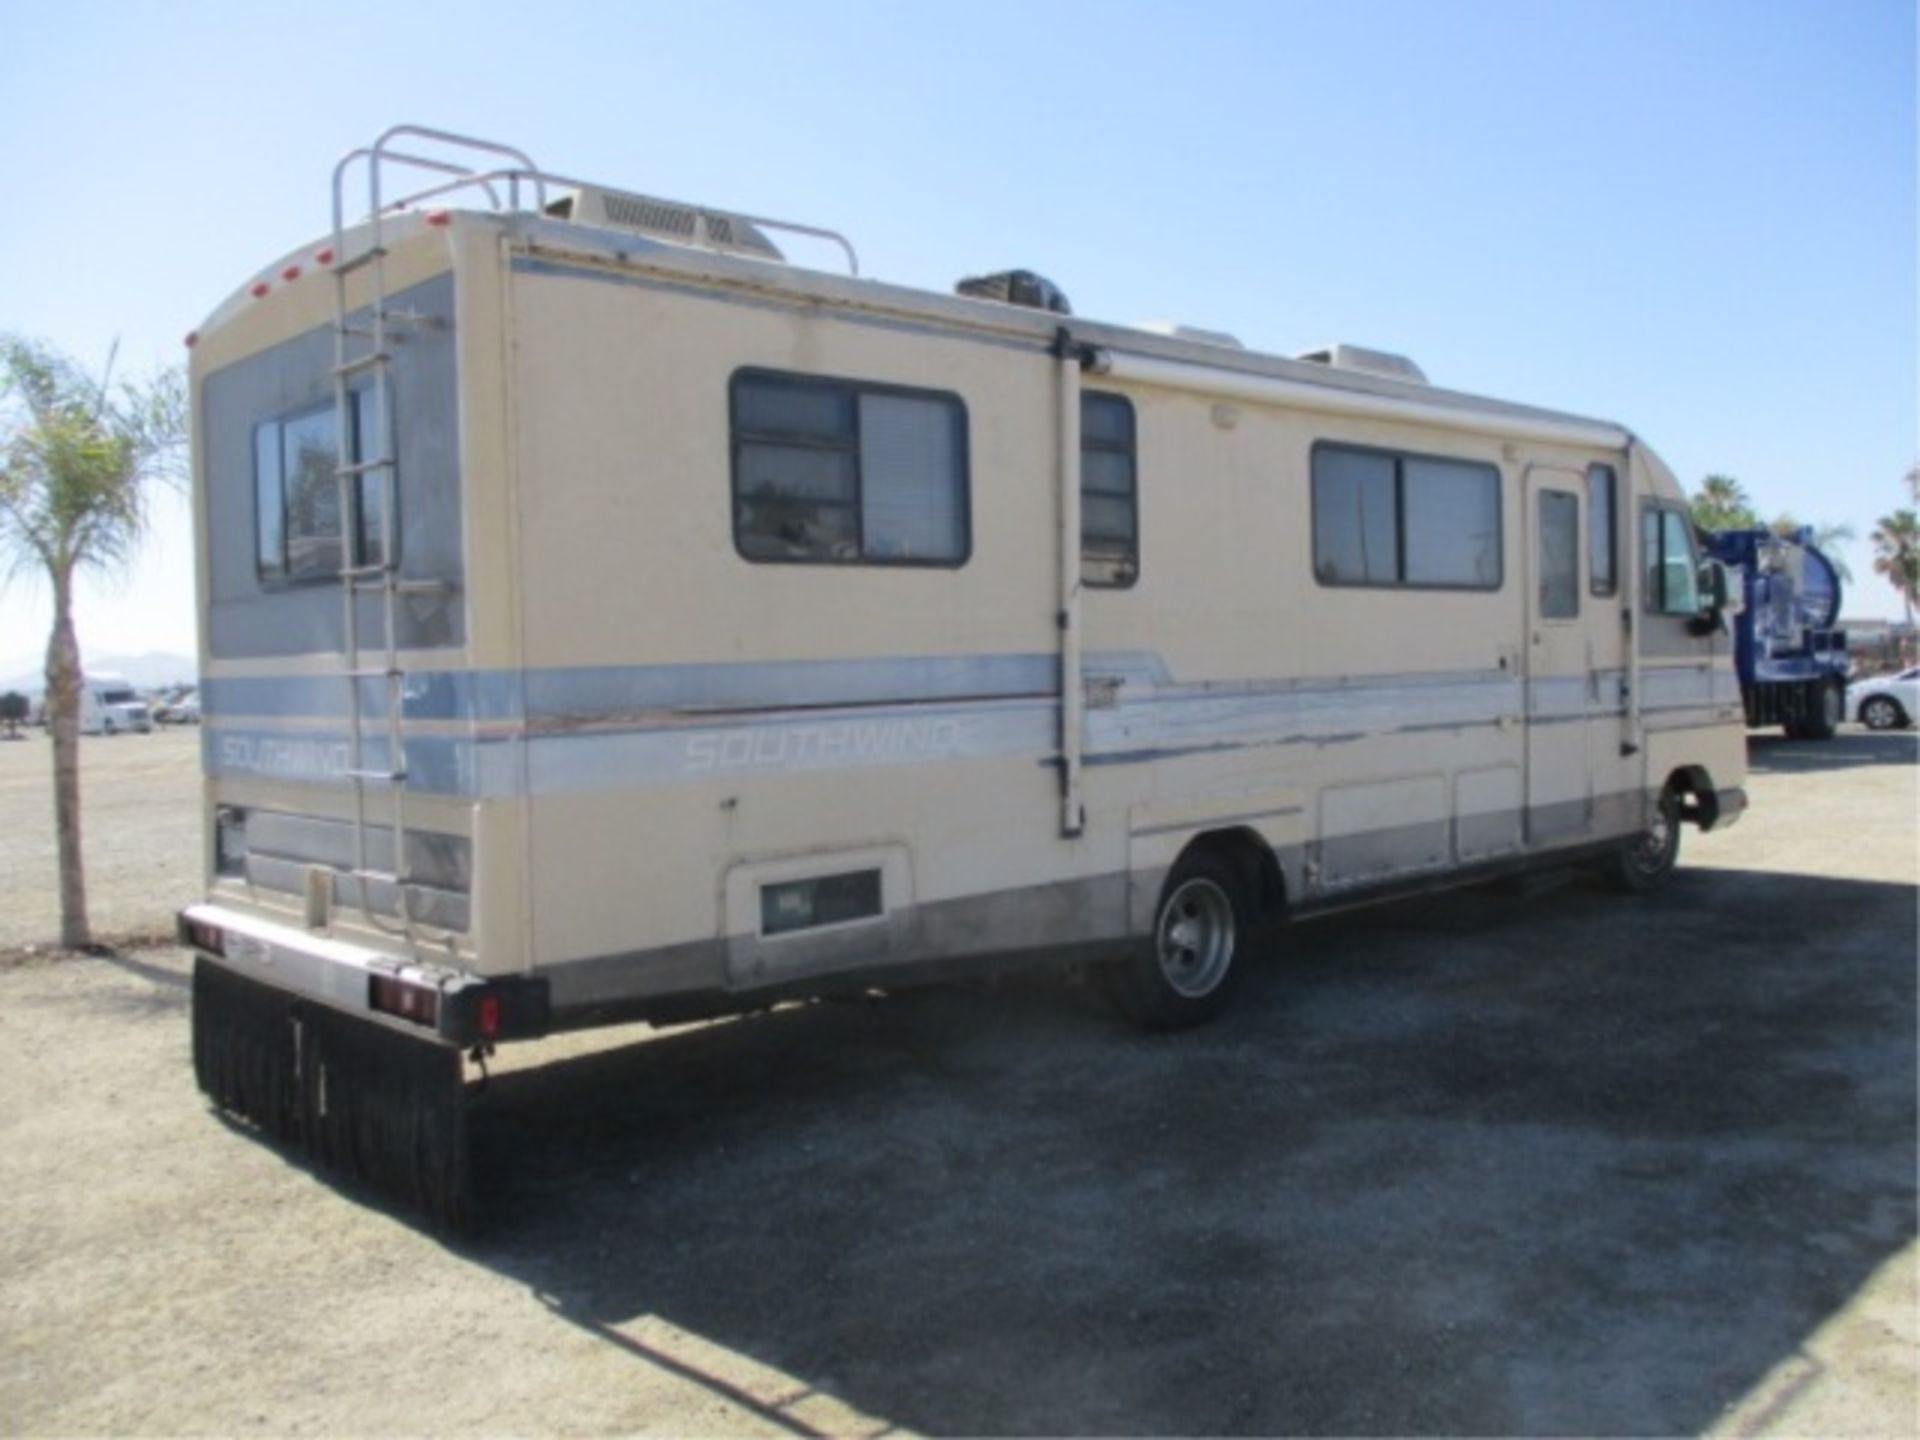 Fleetwood Southwind Motor Home, V8 Gas, Automatic, Refrigerator, Microwave, Stove, Bathroom W/ - Image 15 of 121